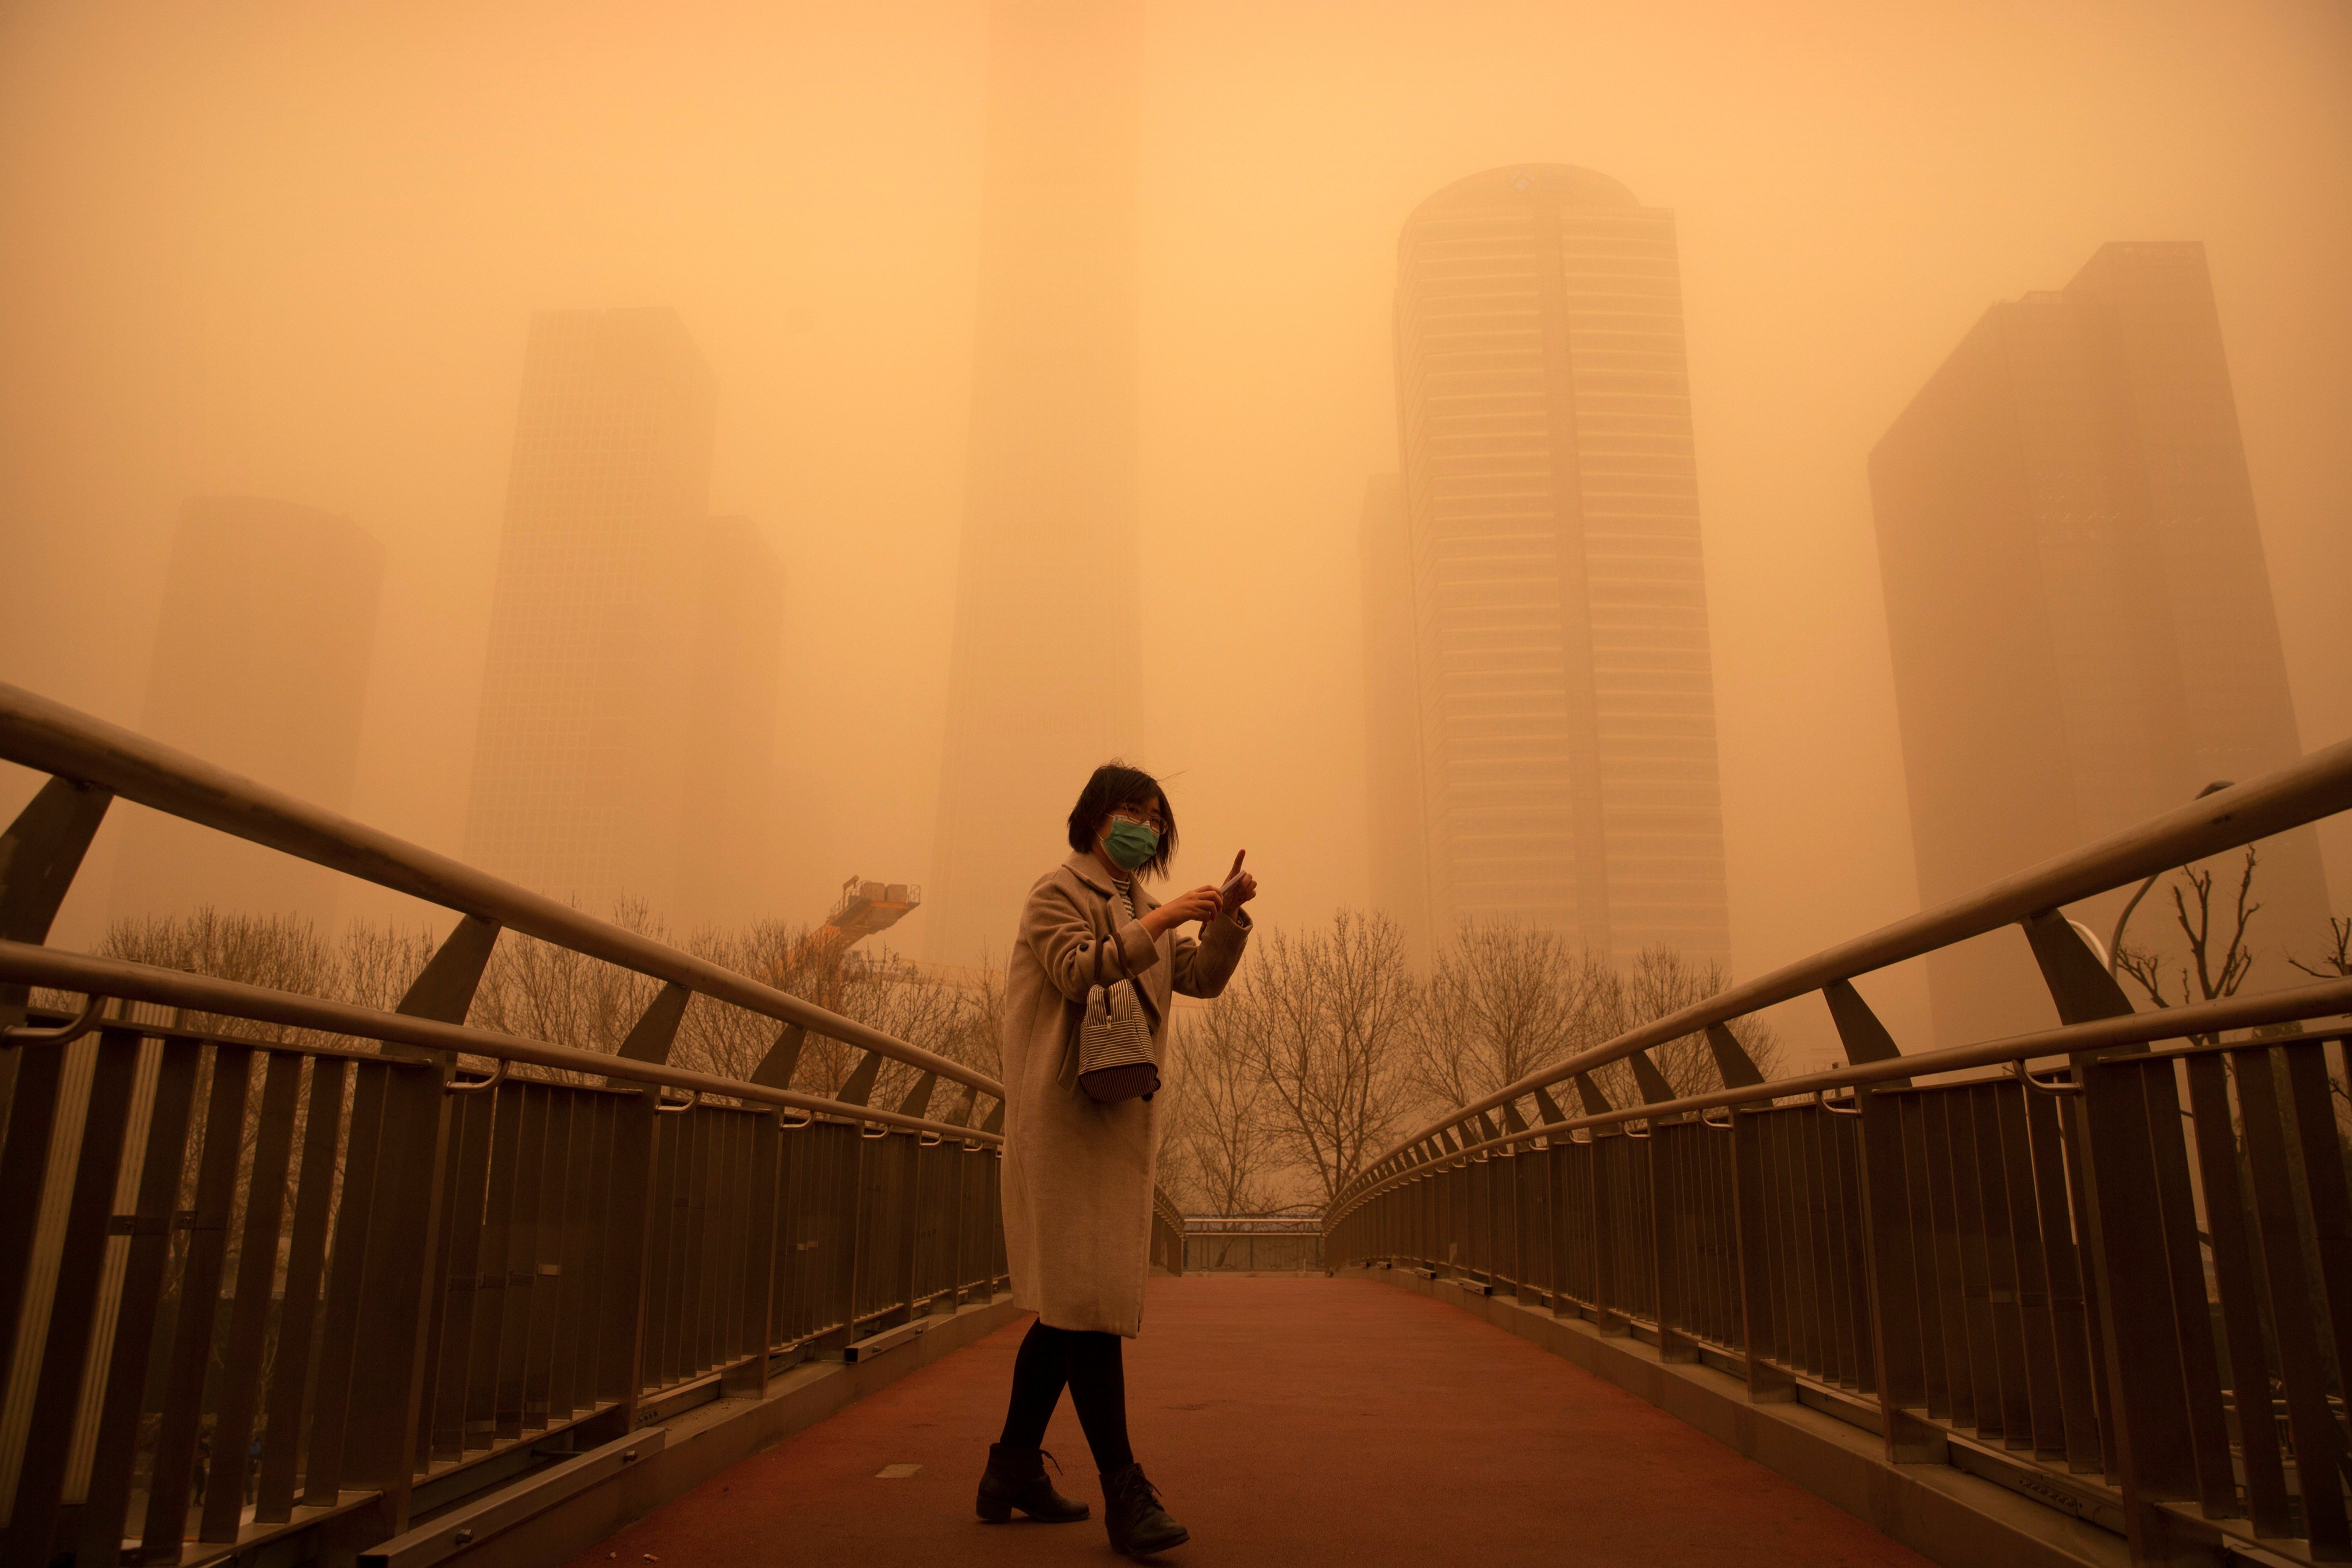 Air pollution worsened across China last year amid extreme weather events like sandstorms and droughts and a resurgence in coal use. Photo: AP